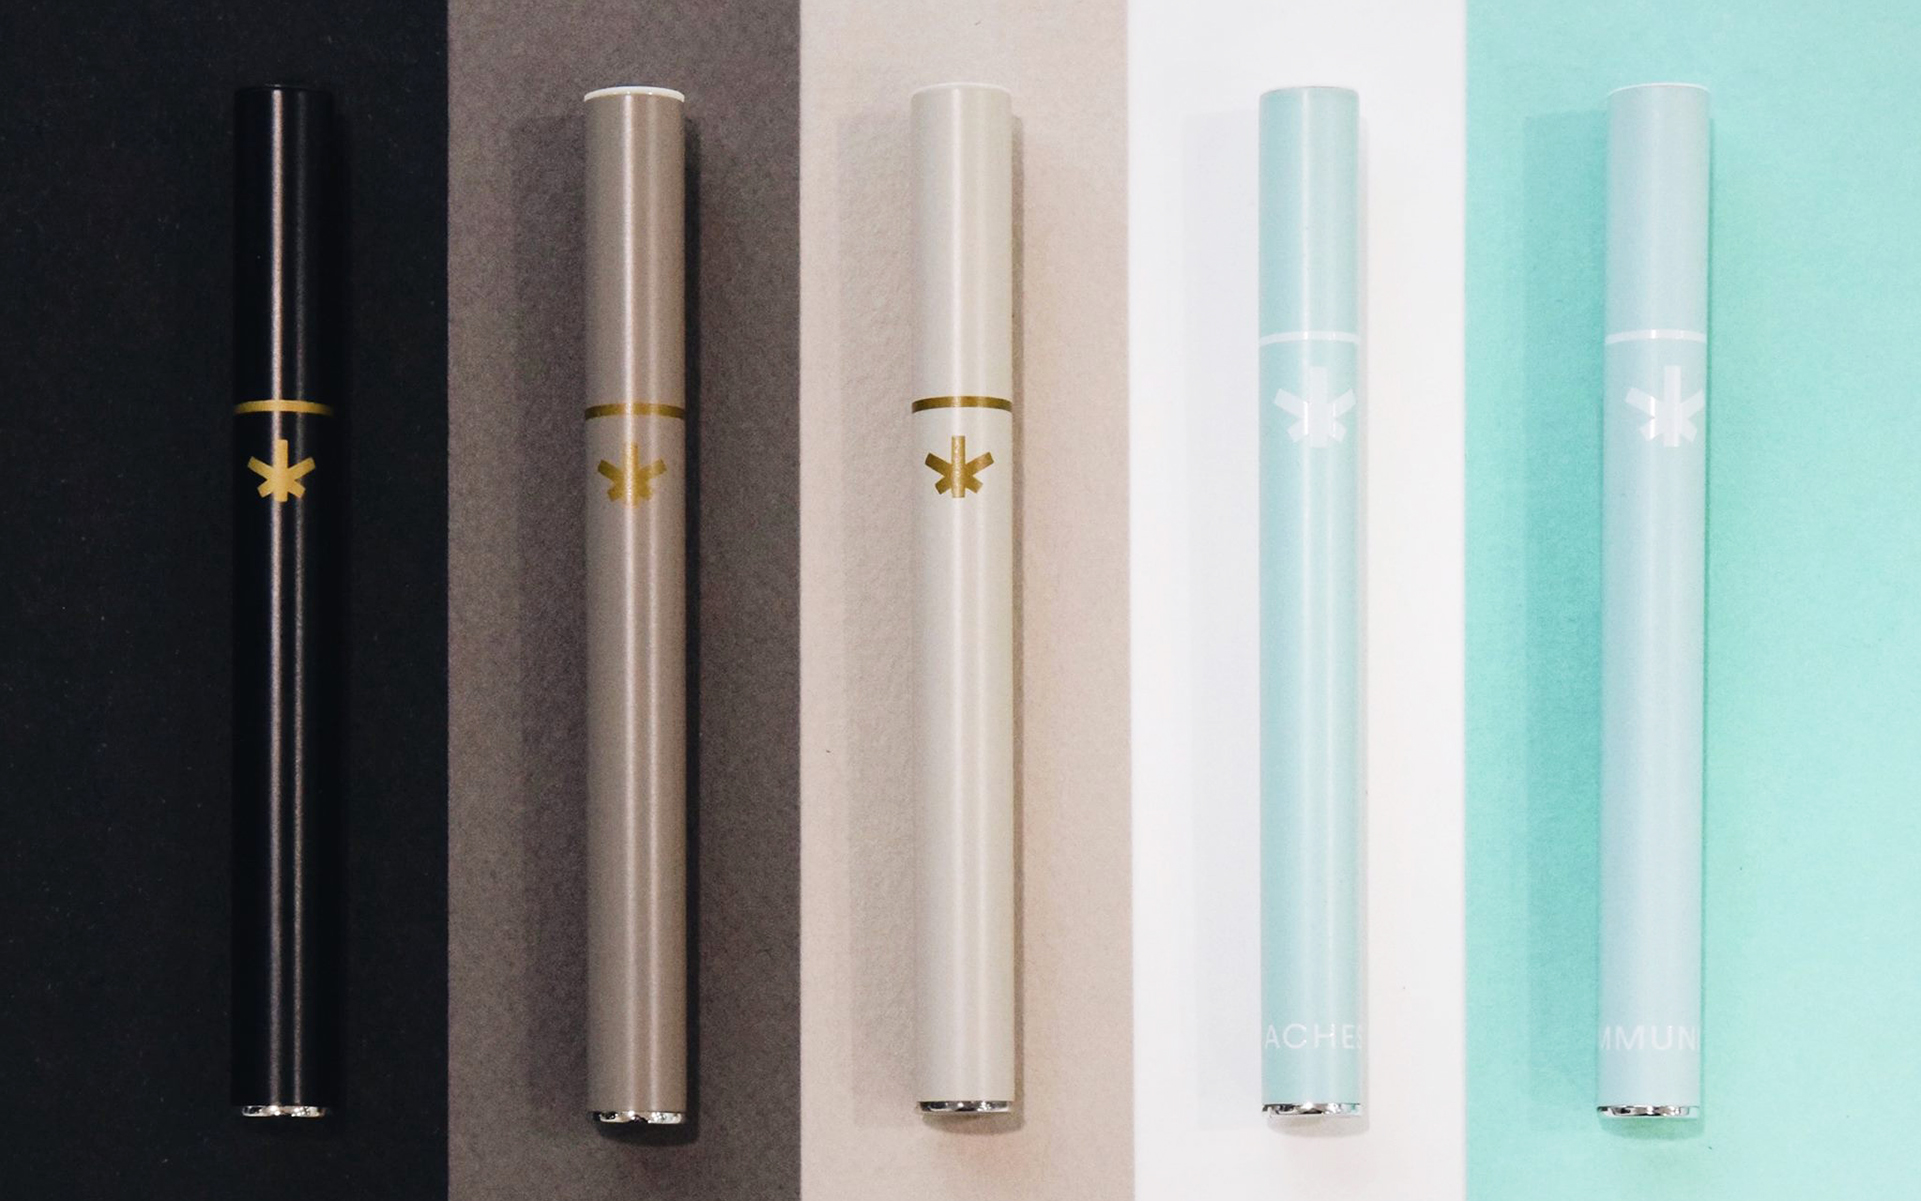 disposable vapes with high thc are available;e at the 6ix cannabis dispensary in ajax.